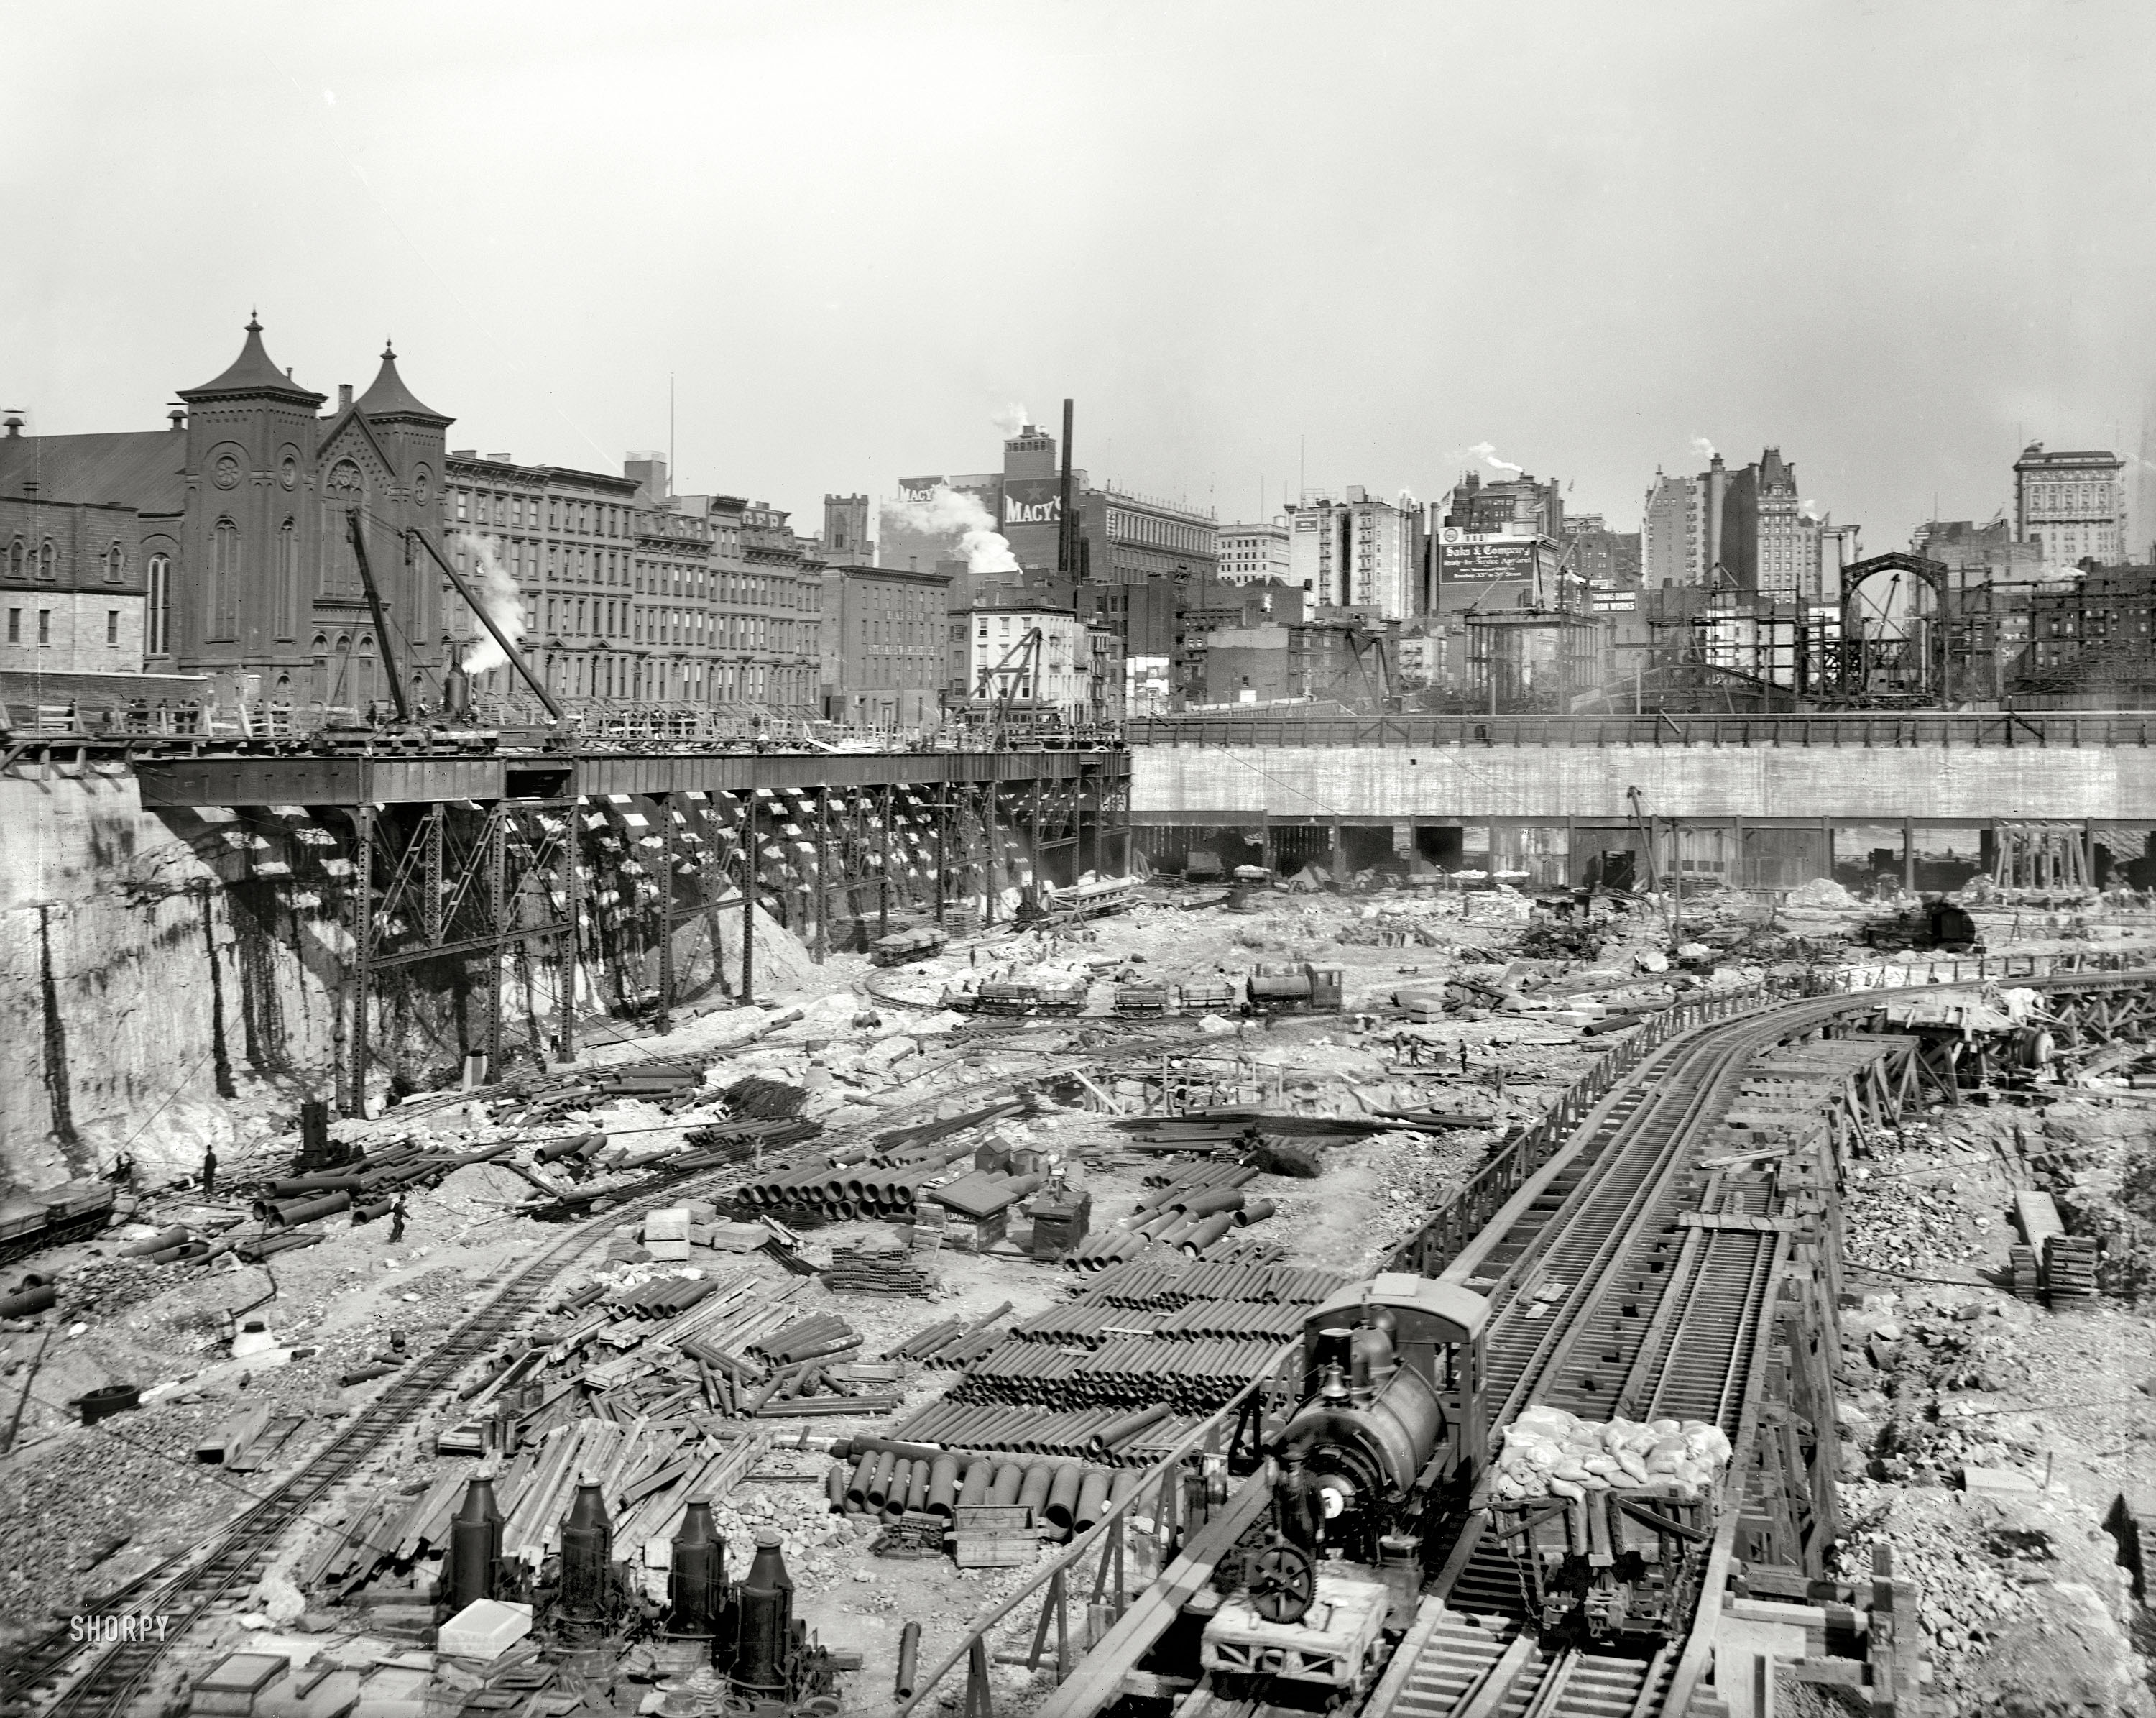 New York circa 1908. "The big Pennsylvania hole." Excavations for Pennsylvania Station. 8x10 inch glass negative, Detroit Publishing Company. View full size.